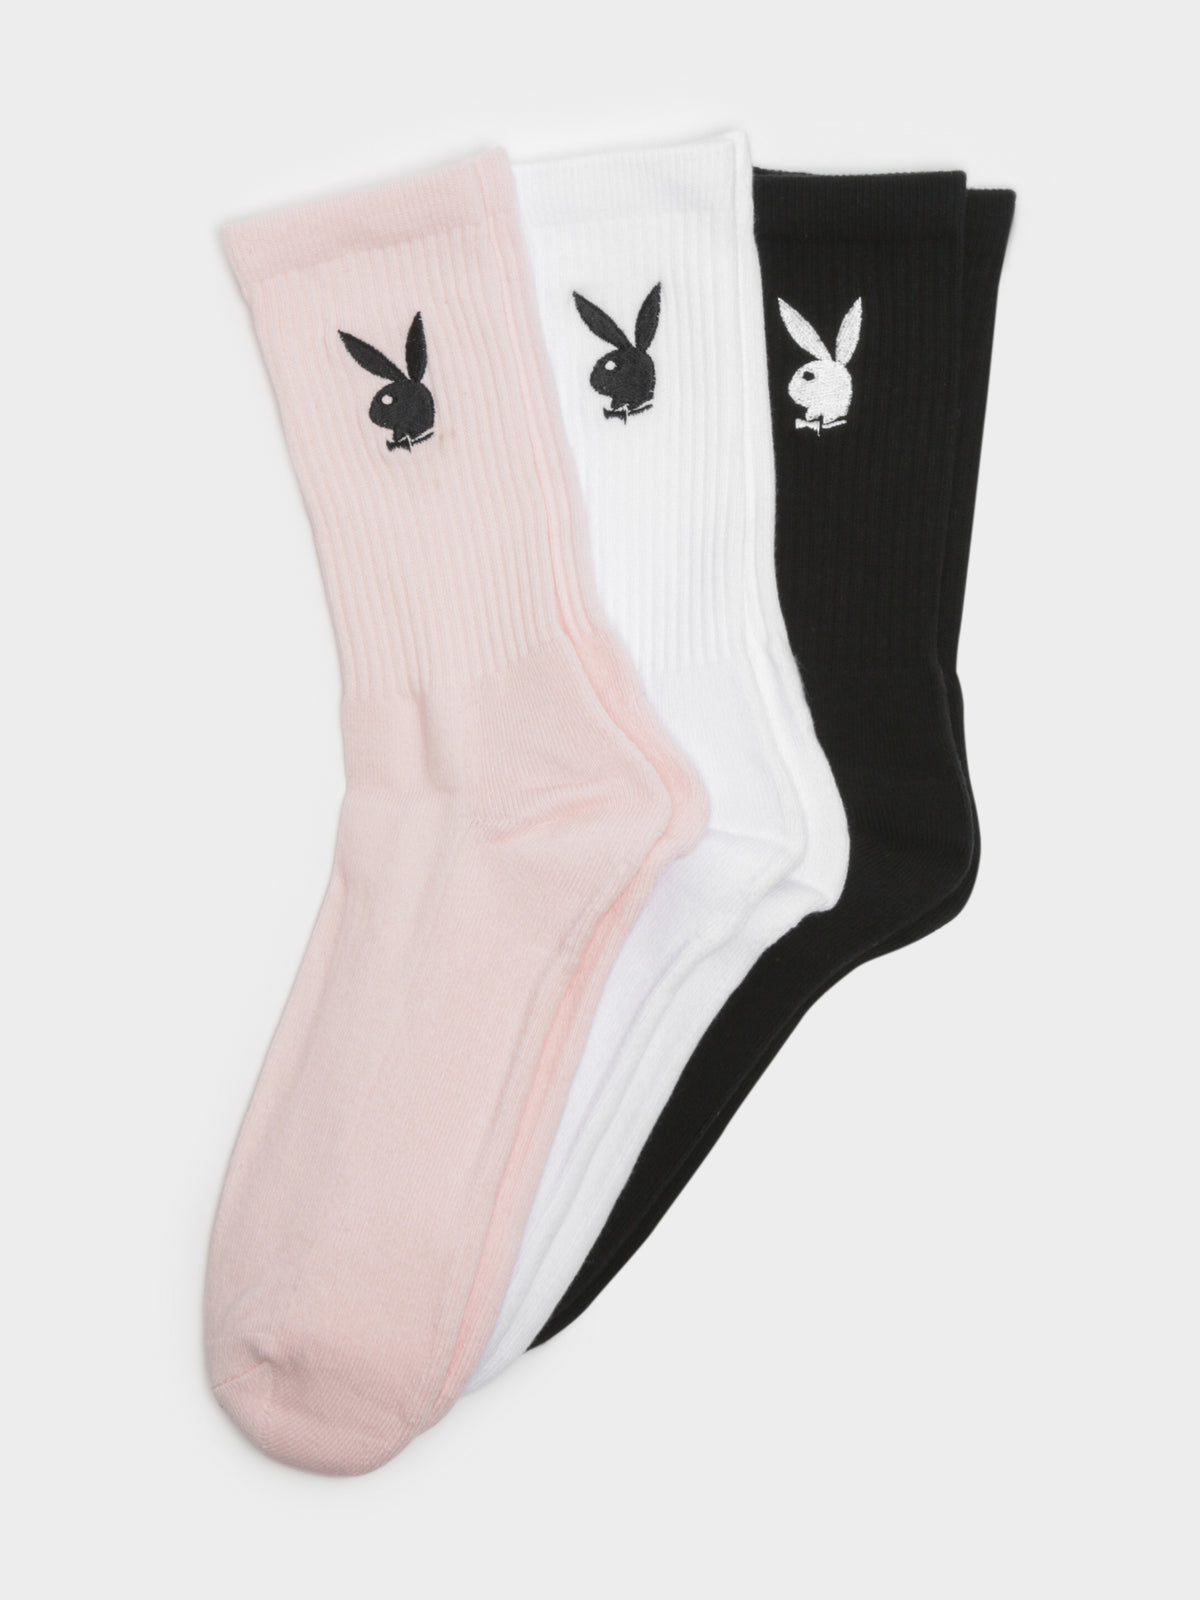 3 Pairs of Bunny Crew Socks in Black, White &amp; Pink